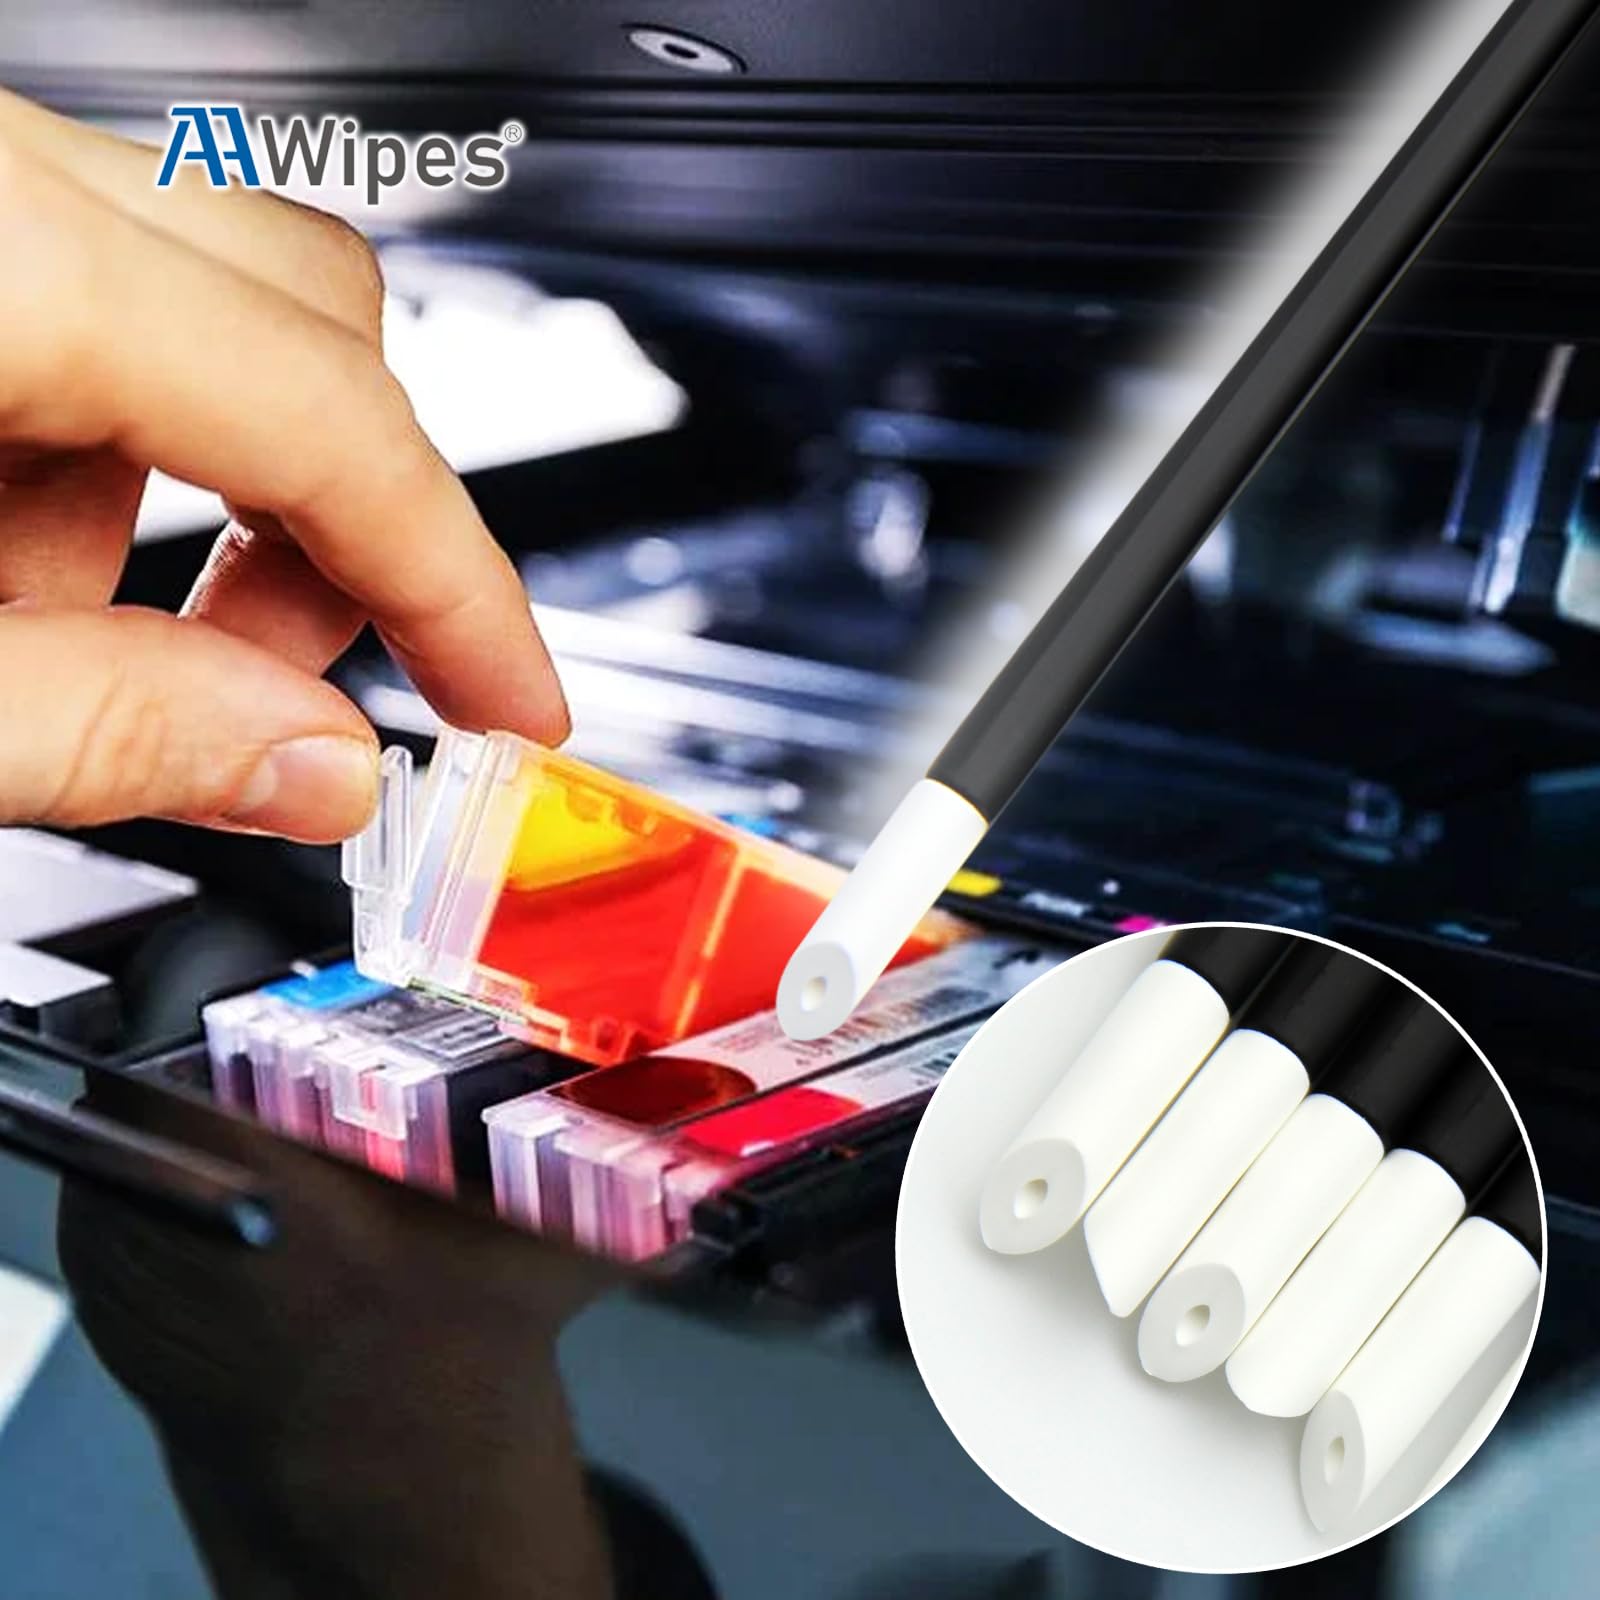 AAWipes Premium Quality Super Porous PrintHead Swabs (100-Pieces, Ultrasoft, Super Porous, Angled PU Tip) for Mimaki, Epson, Brother, HP, Roland, DTG, Wide Format Printers. Suitable for Cleaning Guns, Watches, Clocks (ITS-100)